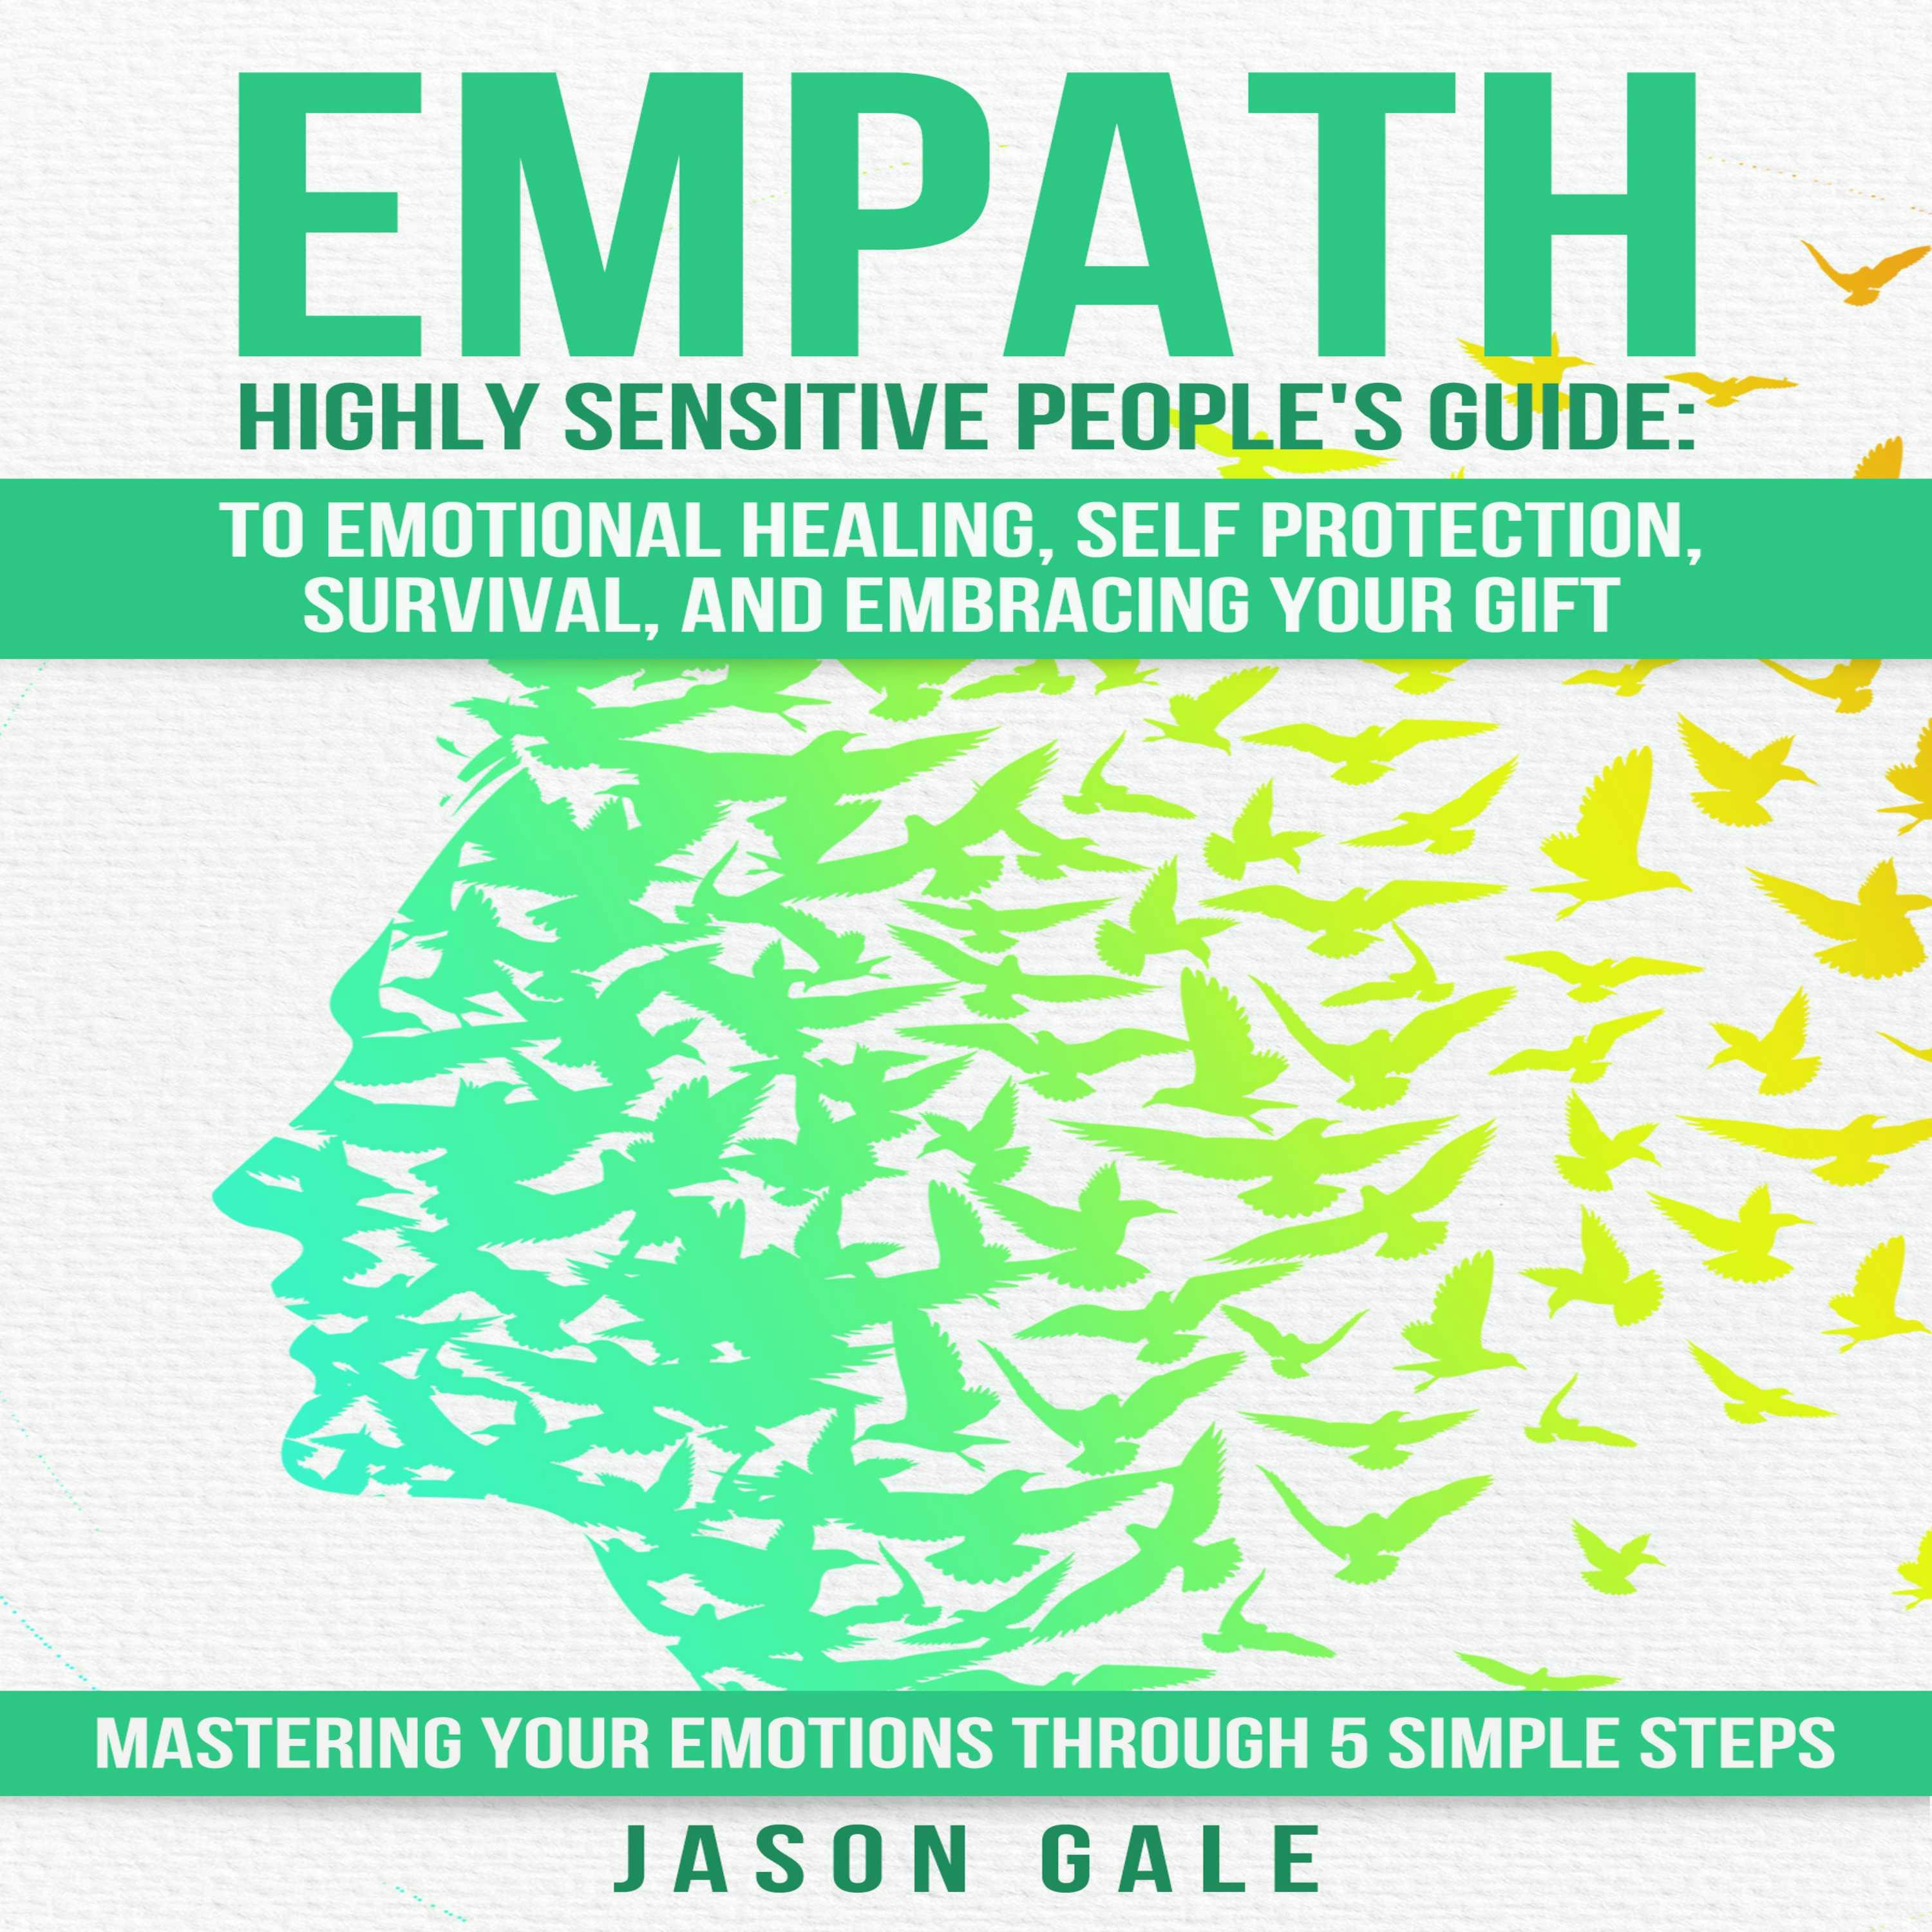 Empath Highly Sensitive People's Guide: To Emotional Healing, Self Protection, Survival, And Embracing Your Gift: Mastering Your Emotions Through 5 Simple Steps - undefined